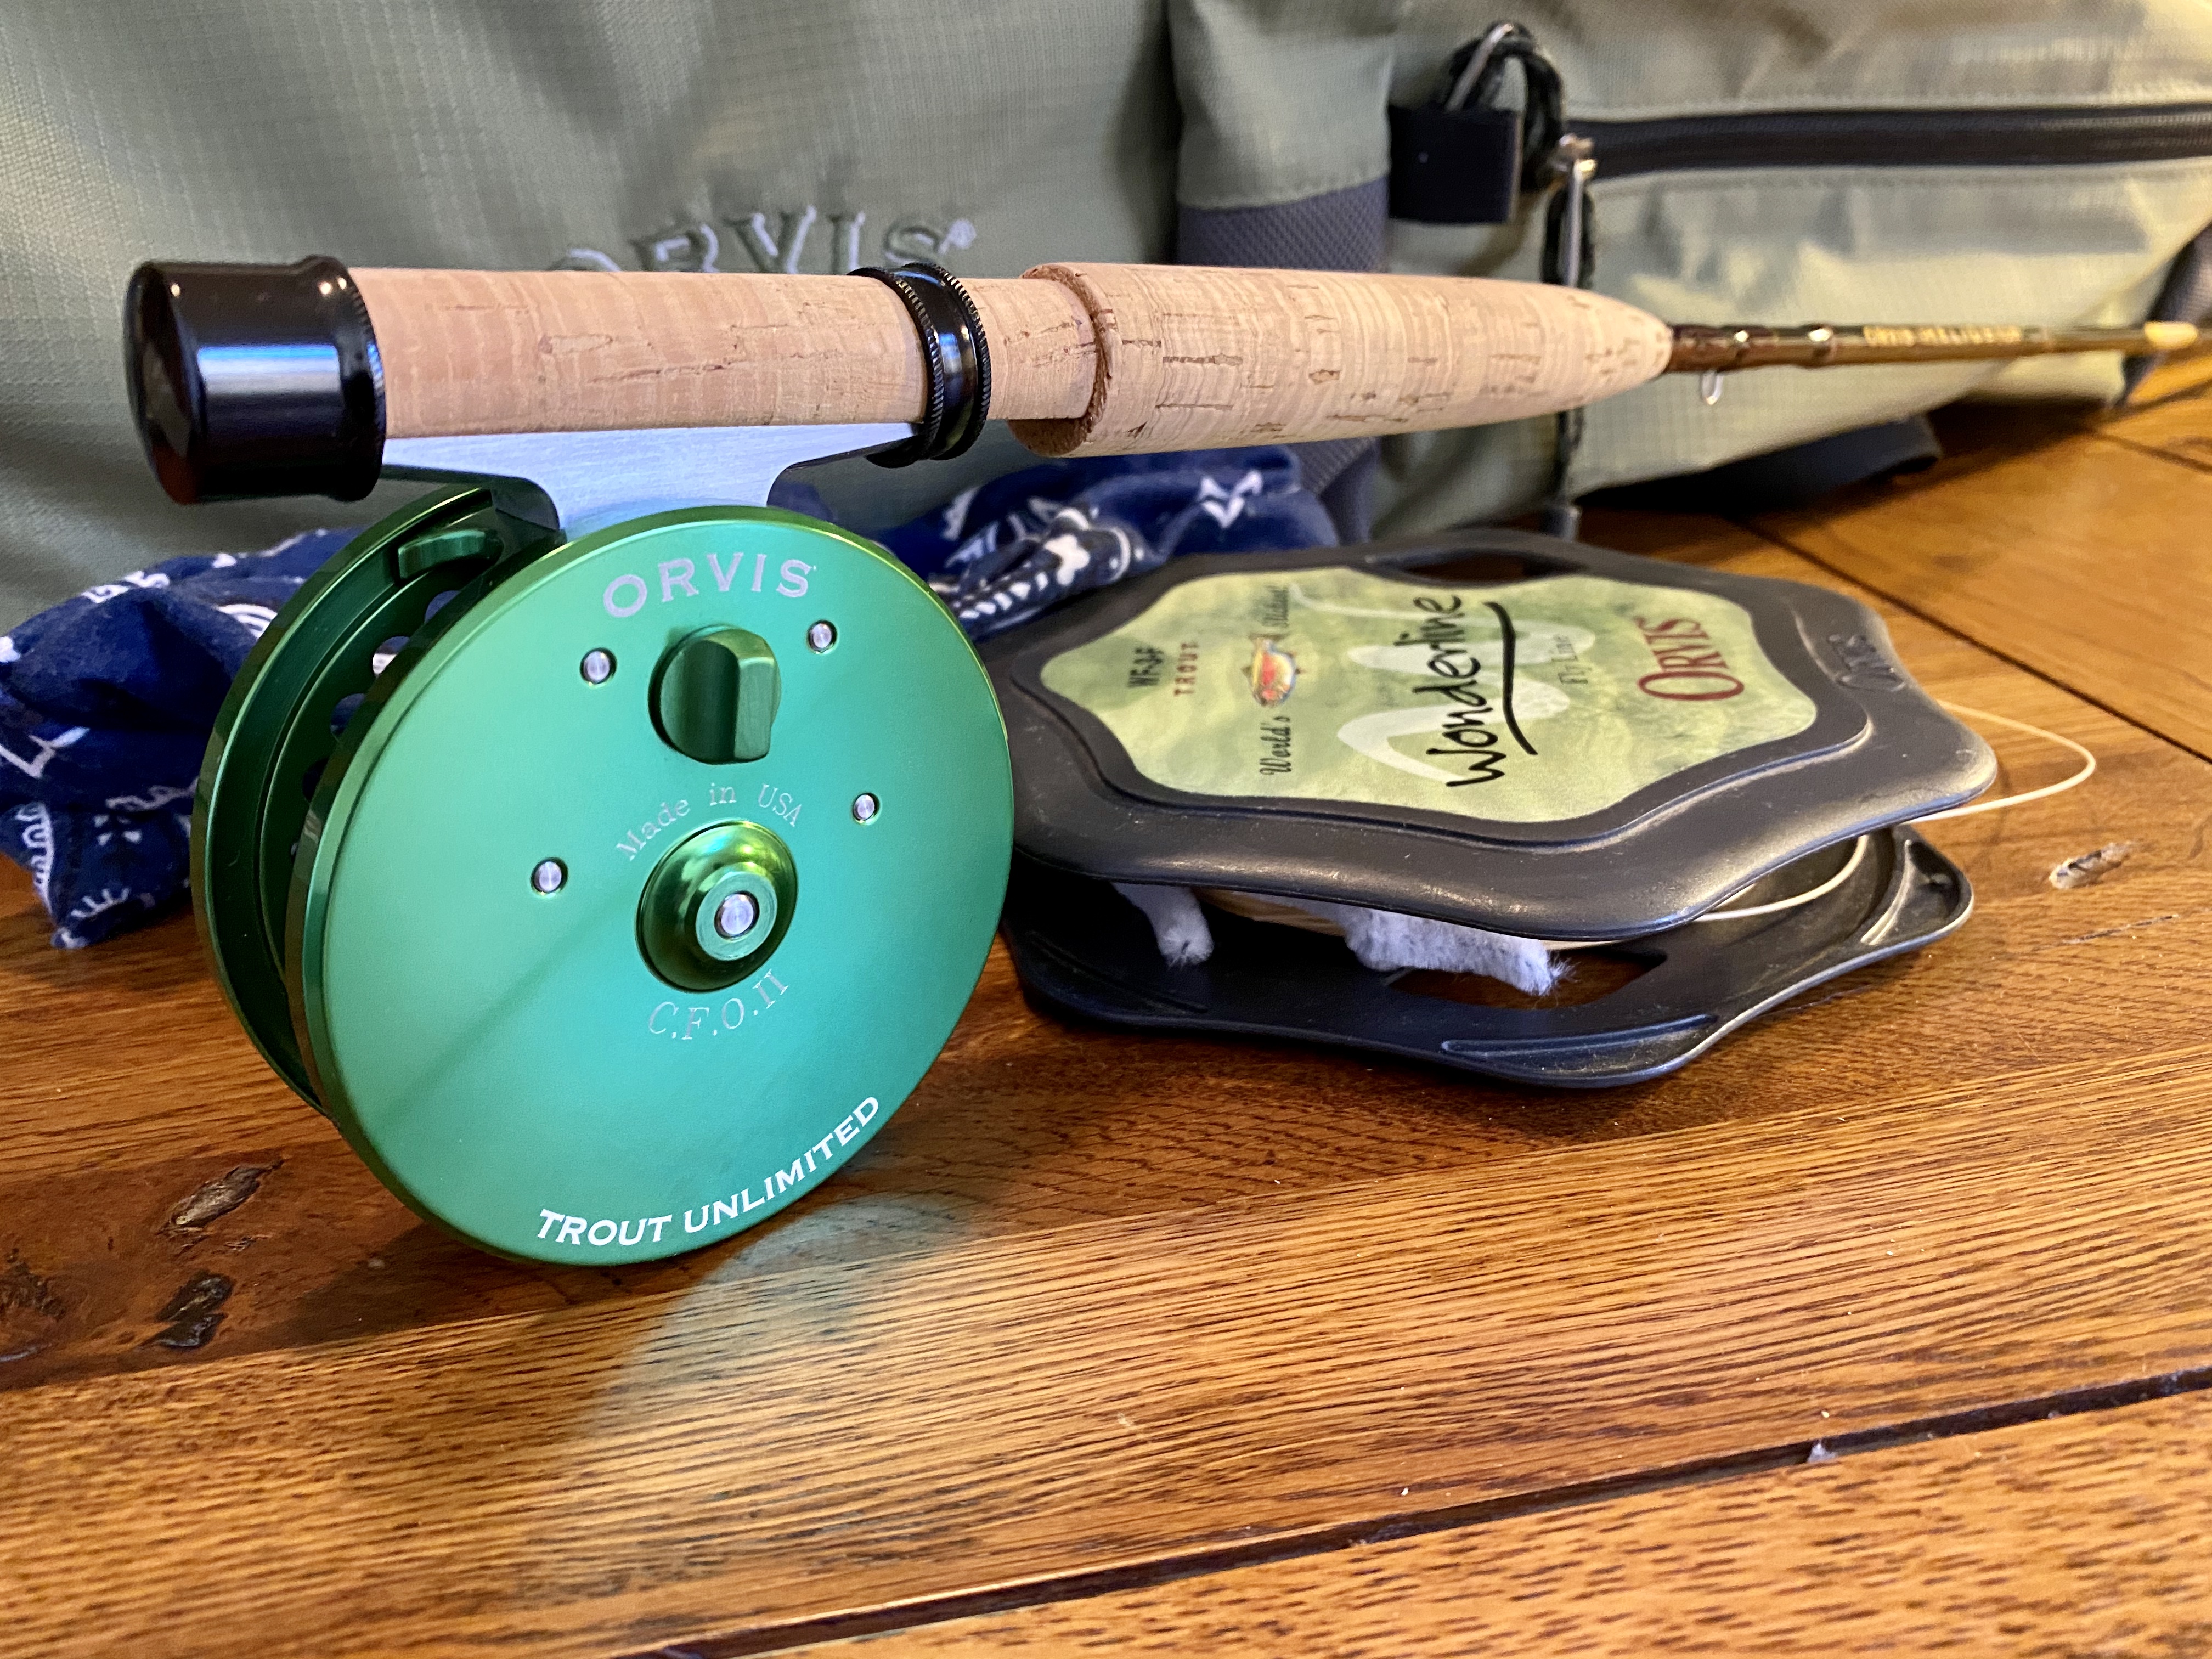 Orvis CFO 123 Fly Fishing Reel. Green & Gold. Made in England. W